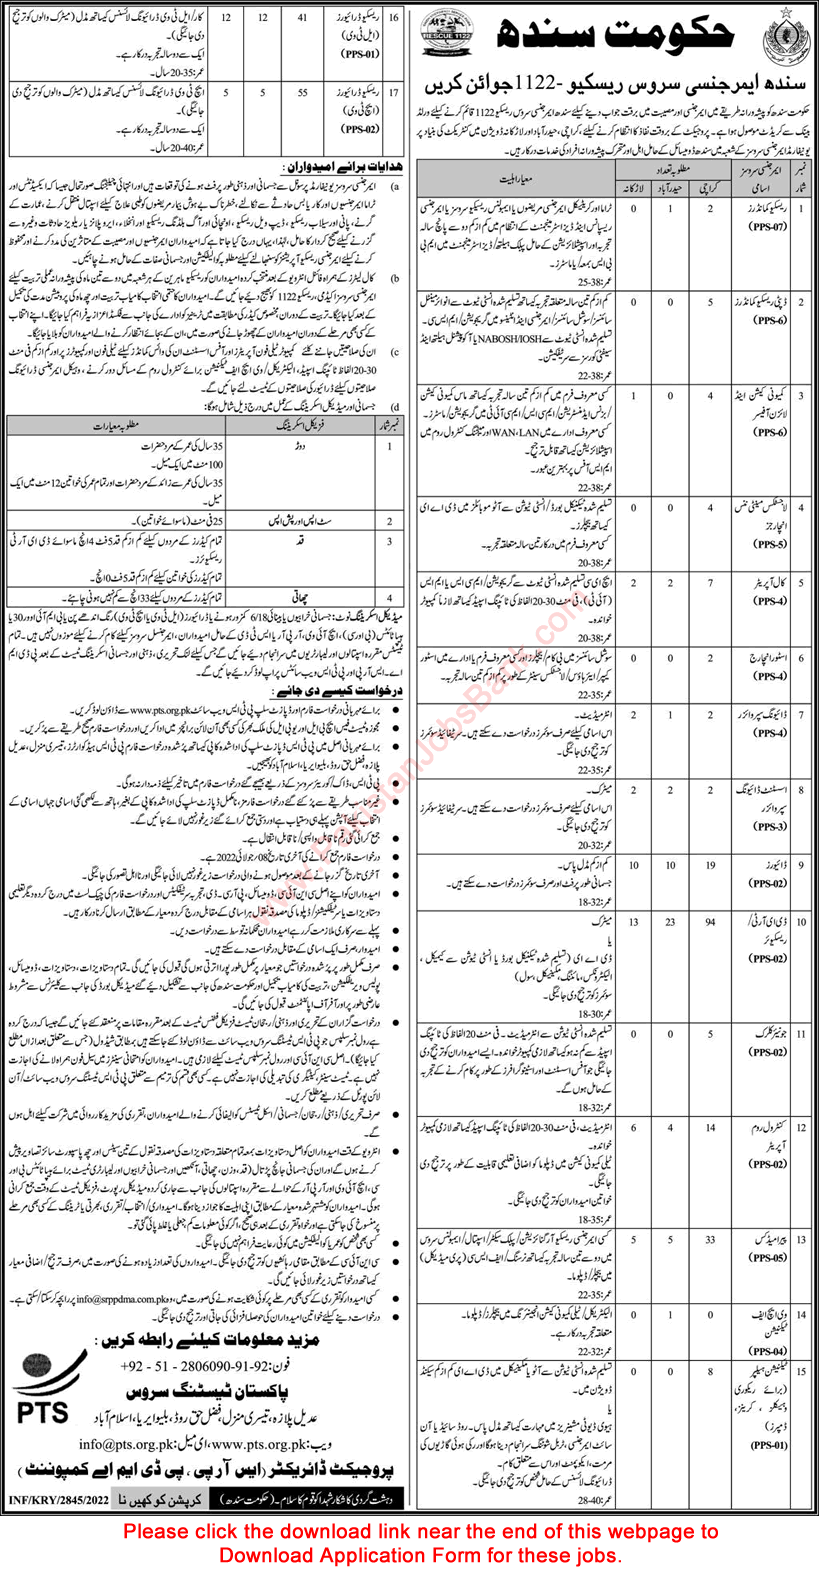 Sindh Emergency Service Rescue 1122 Jobs June 2022 PTS Application Form Join as DERT Rescuers, Drivers & Others Latest